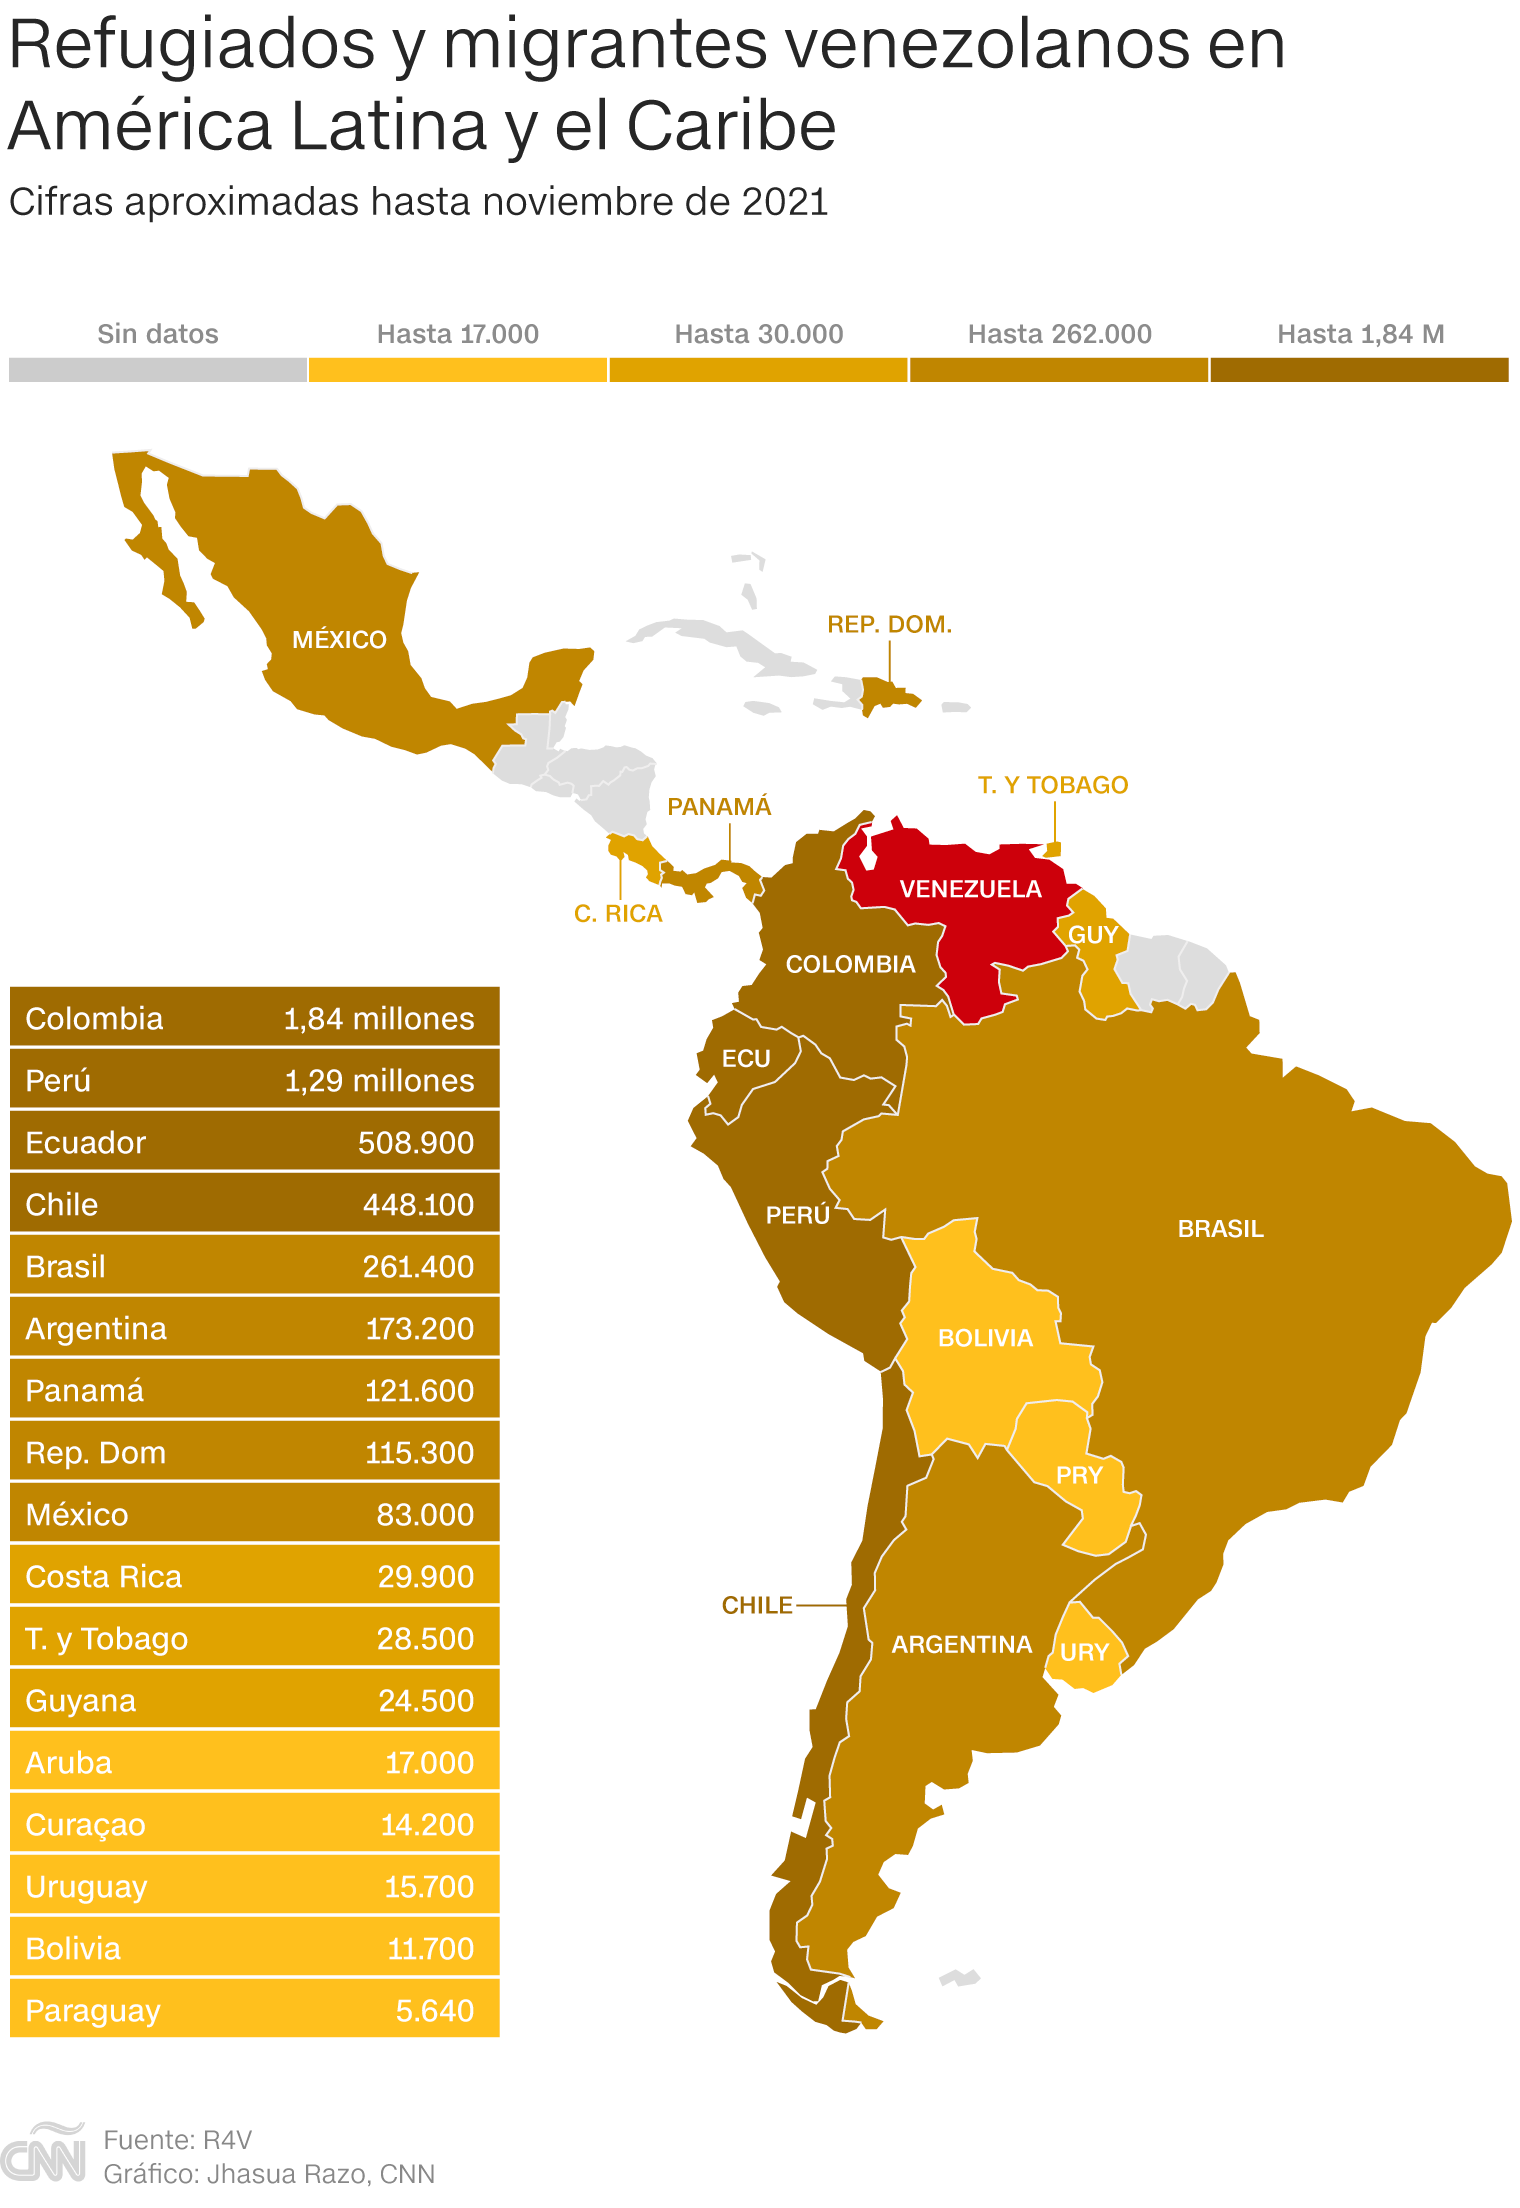 How many Venezuelan migrants are there in Latin America? Look at the